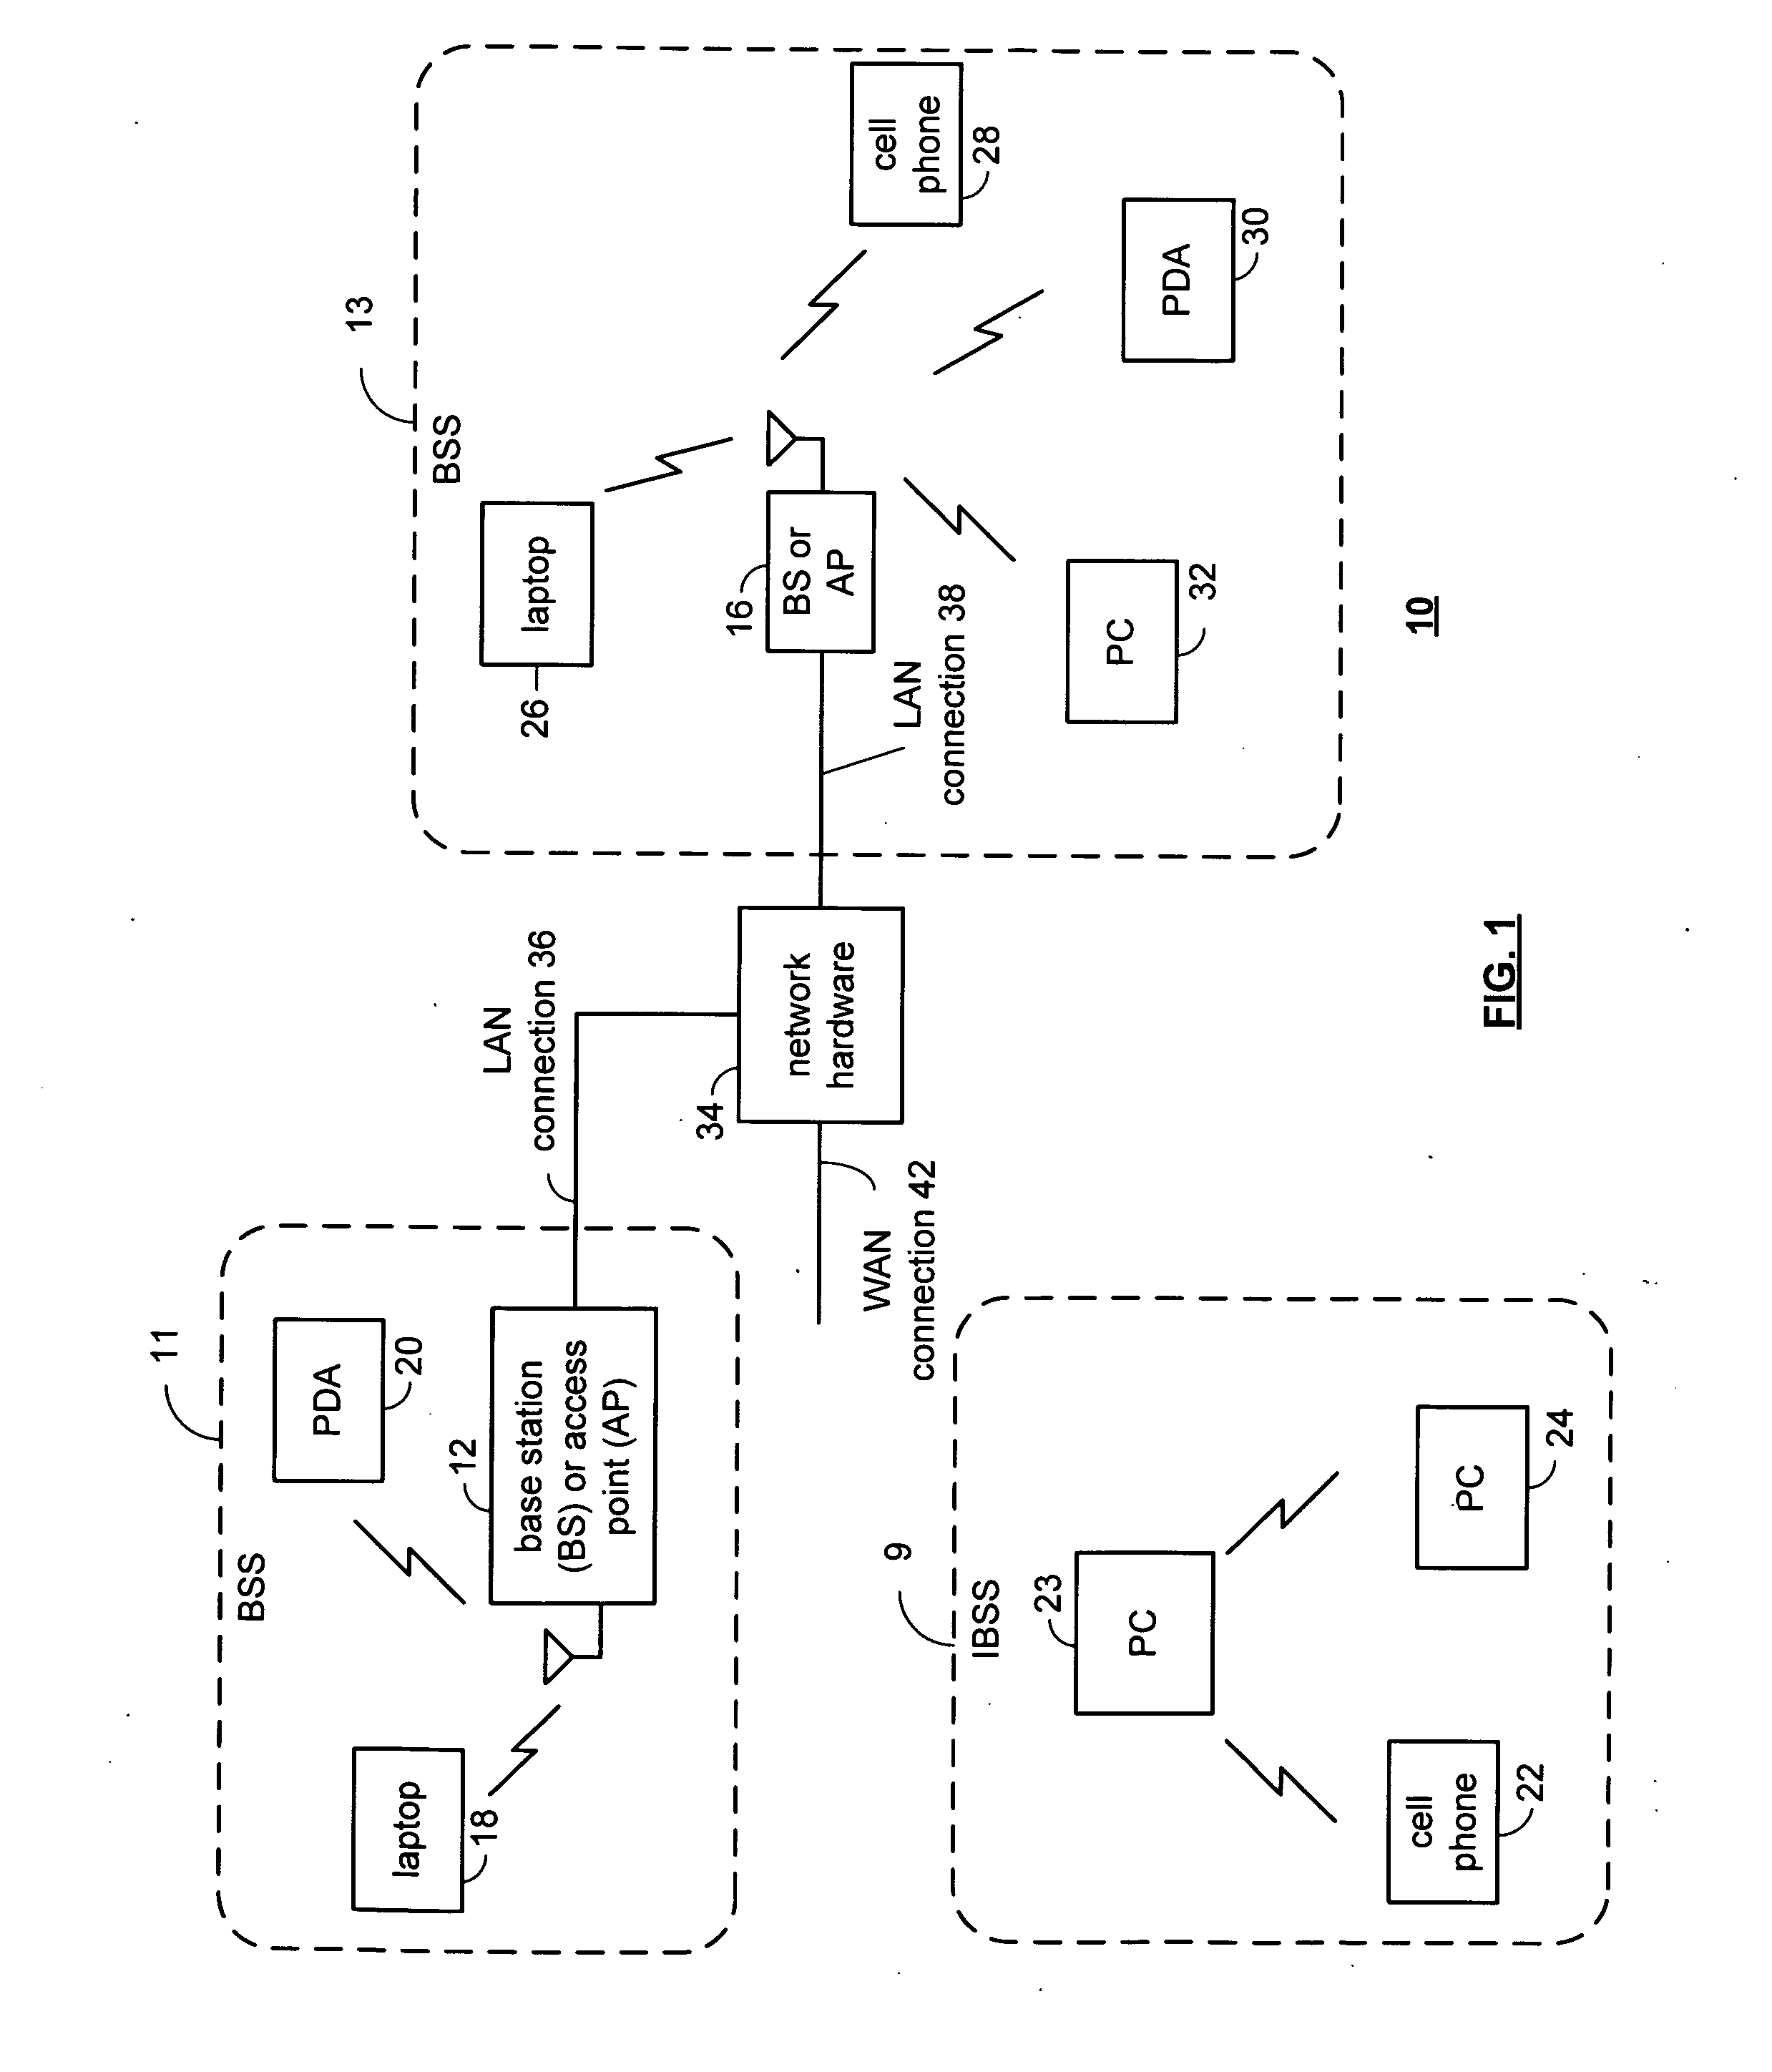 Feedback of channel information in a closed loop beamforming wireless communication system